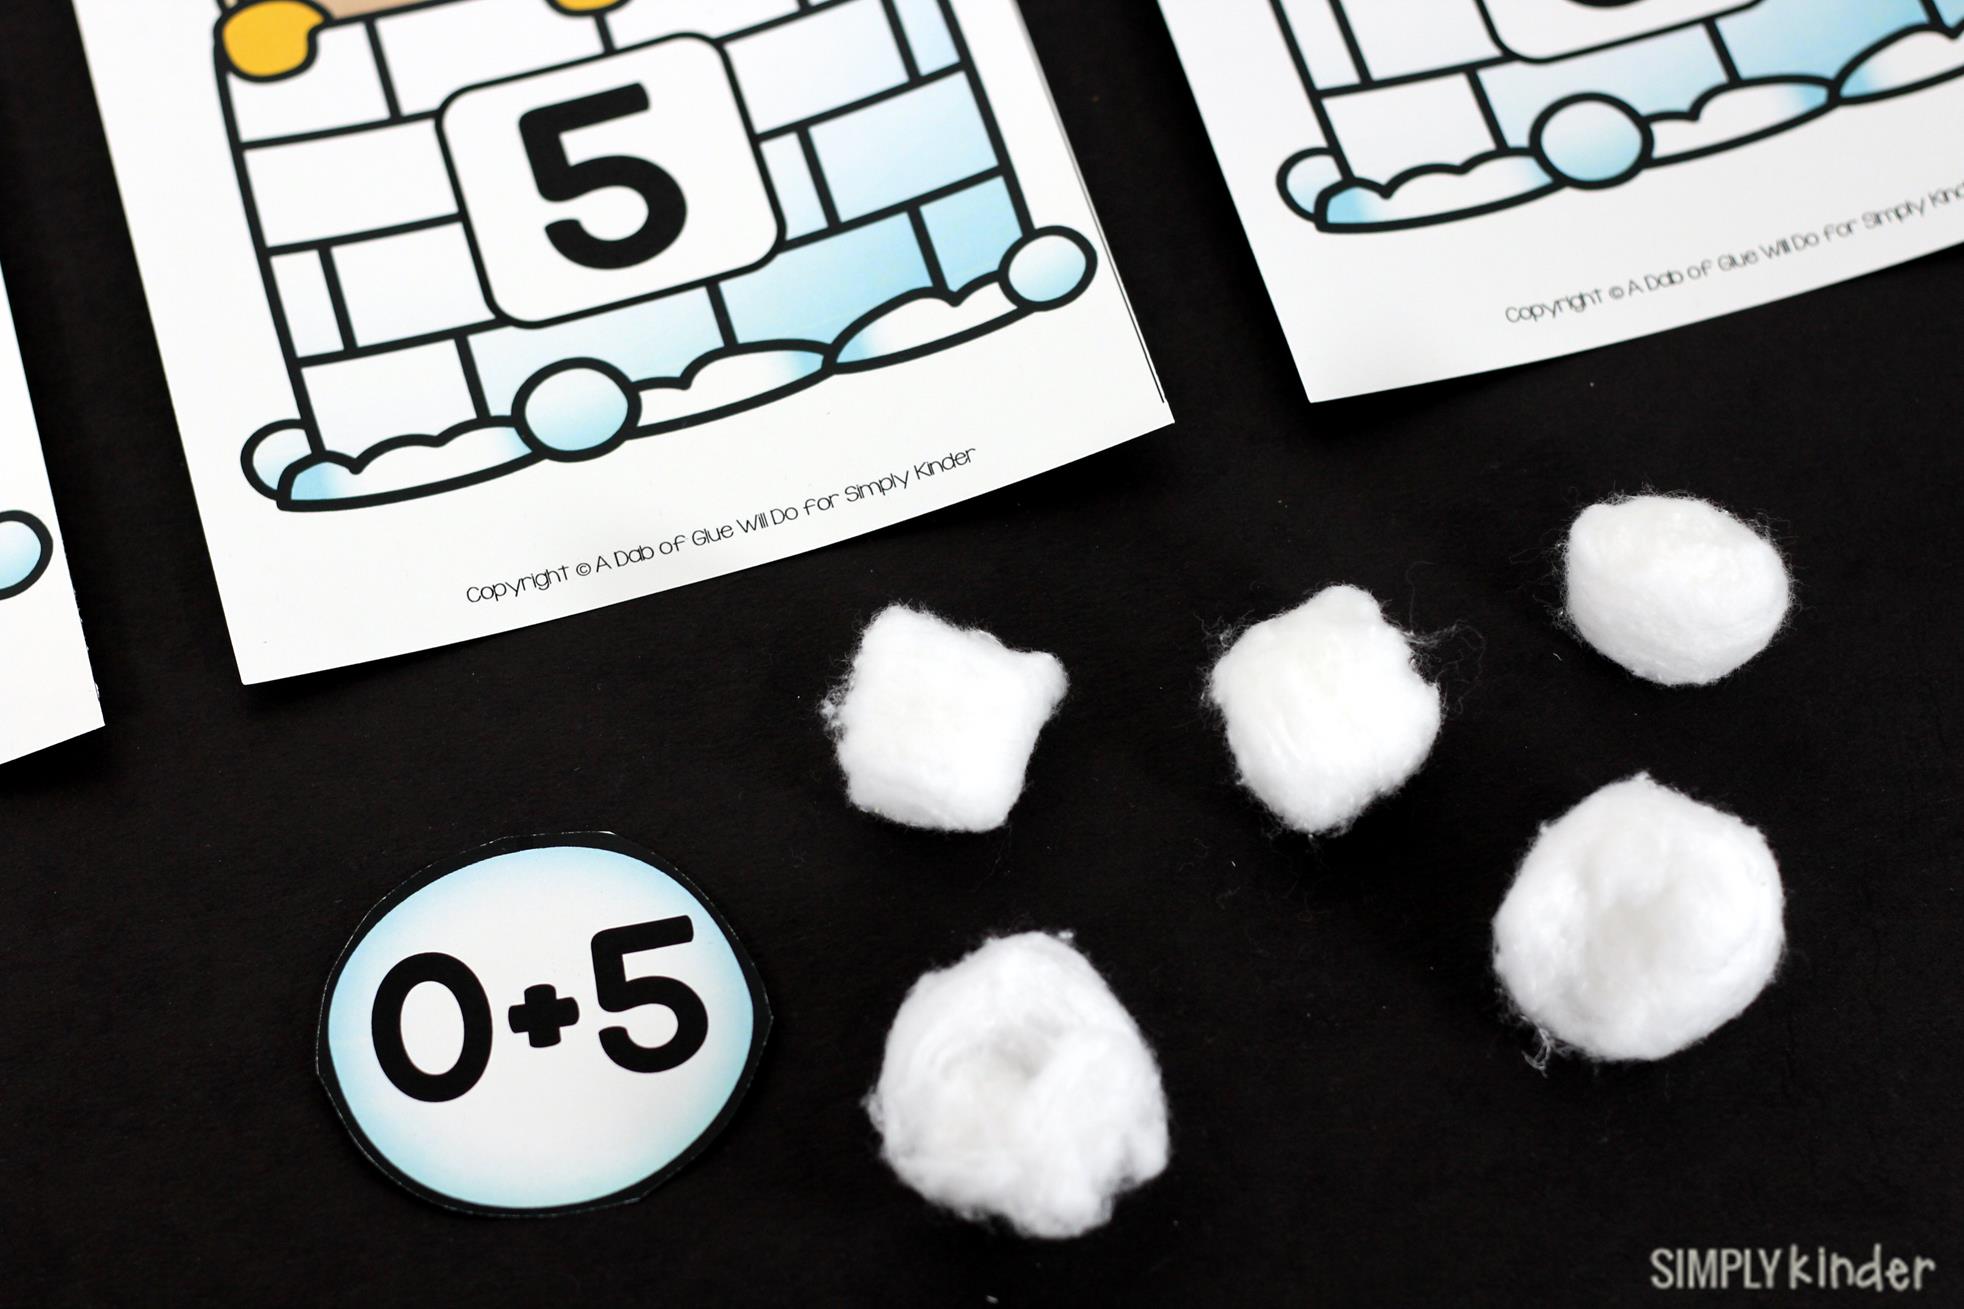 Snowball Addition Game. Perfect for Kindergarten to practice addition facts to 10 during centers.